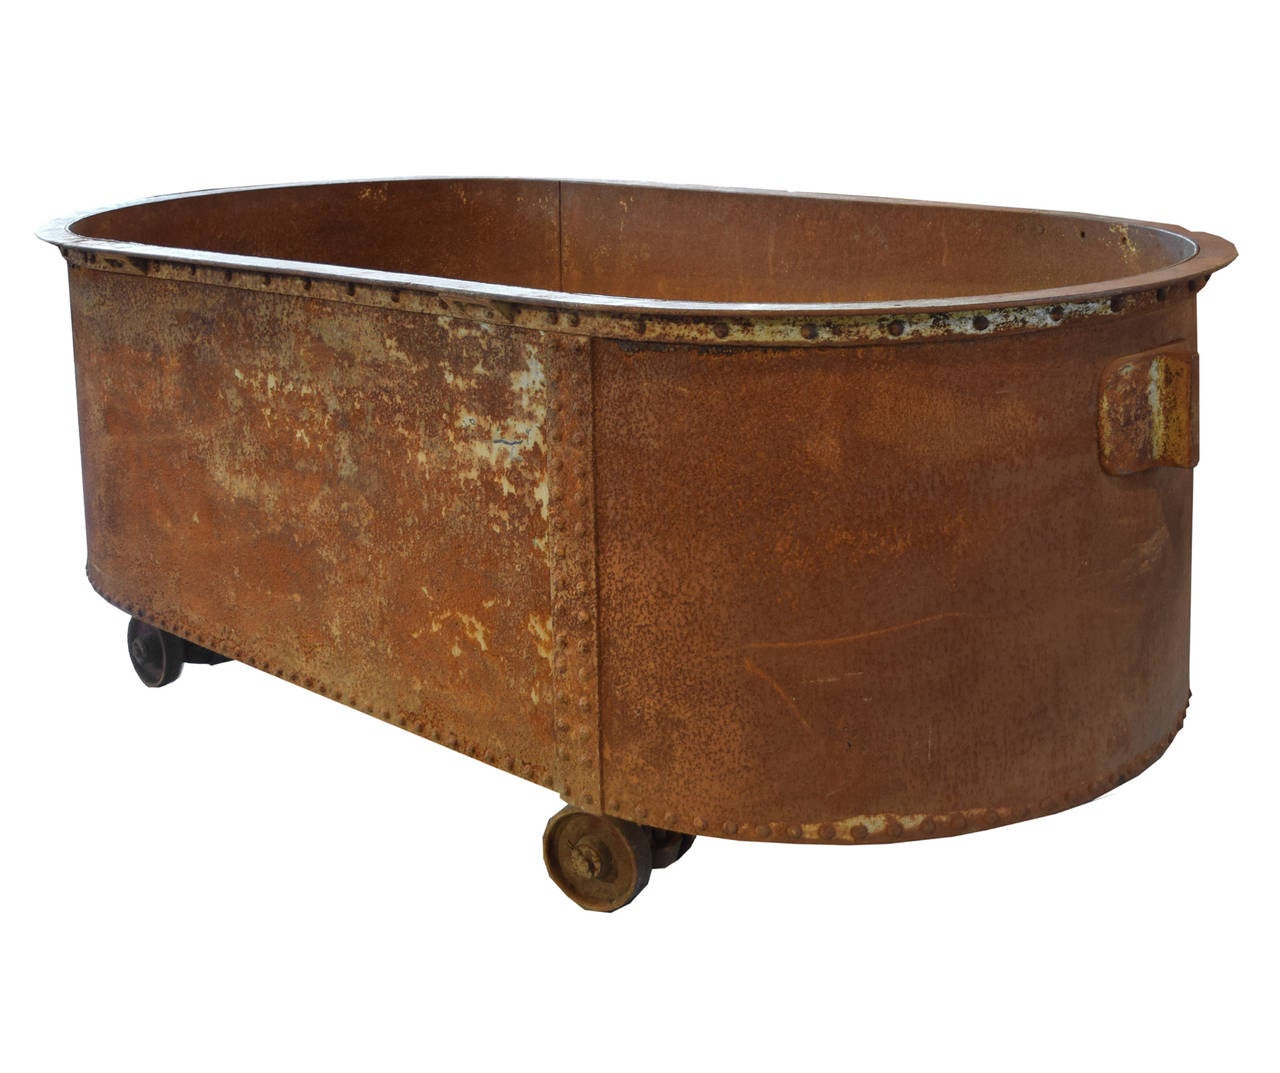 An American cast iron Industrial riveted tub on wheels.